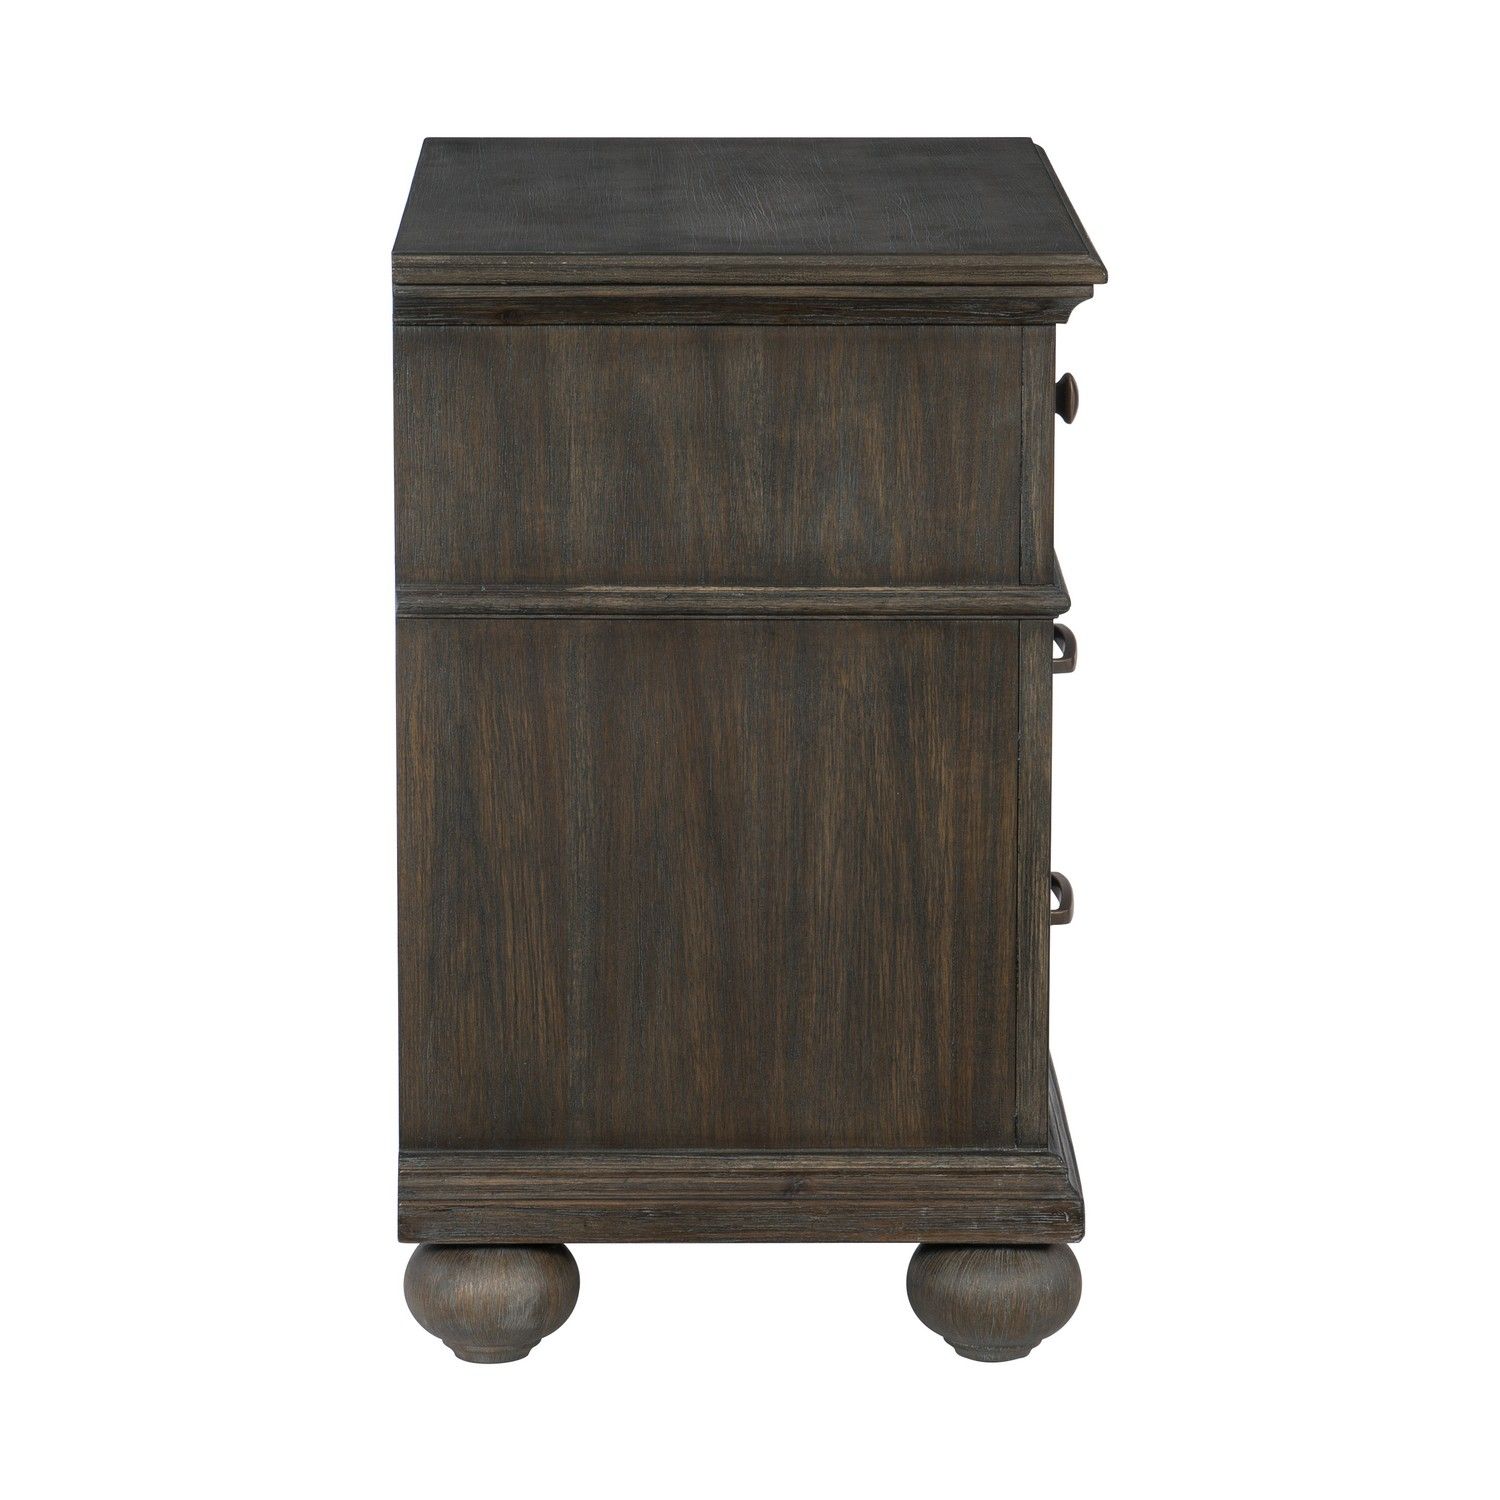 Homelegance Motsinger Night Stand - Wire-brushed Rustic Brown